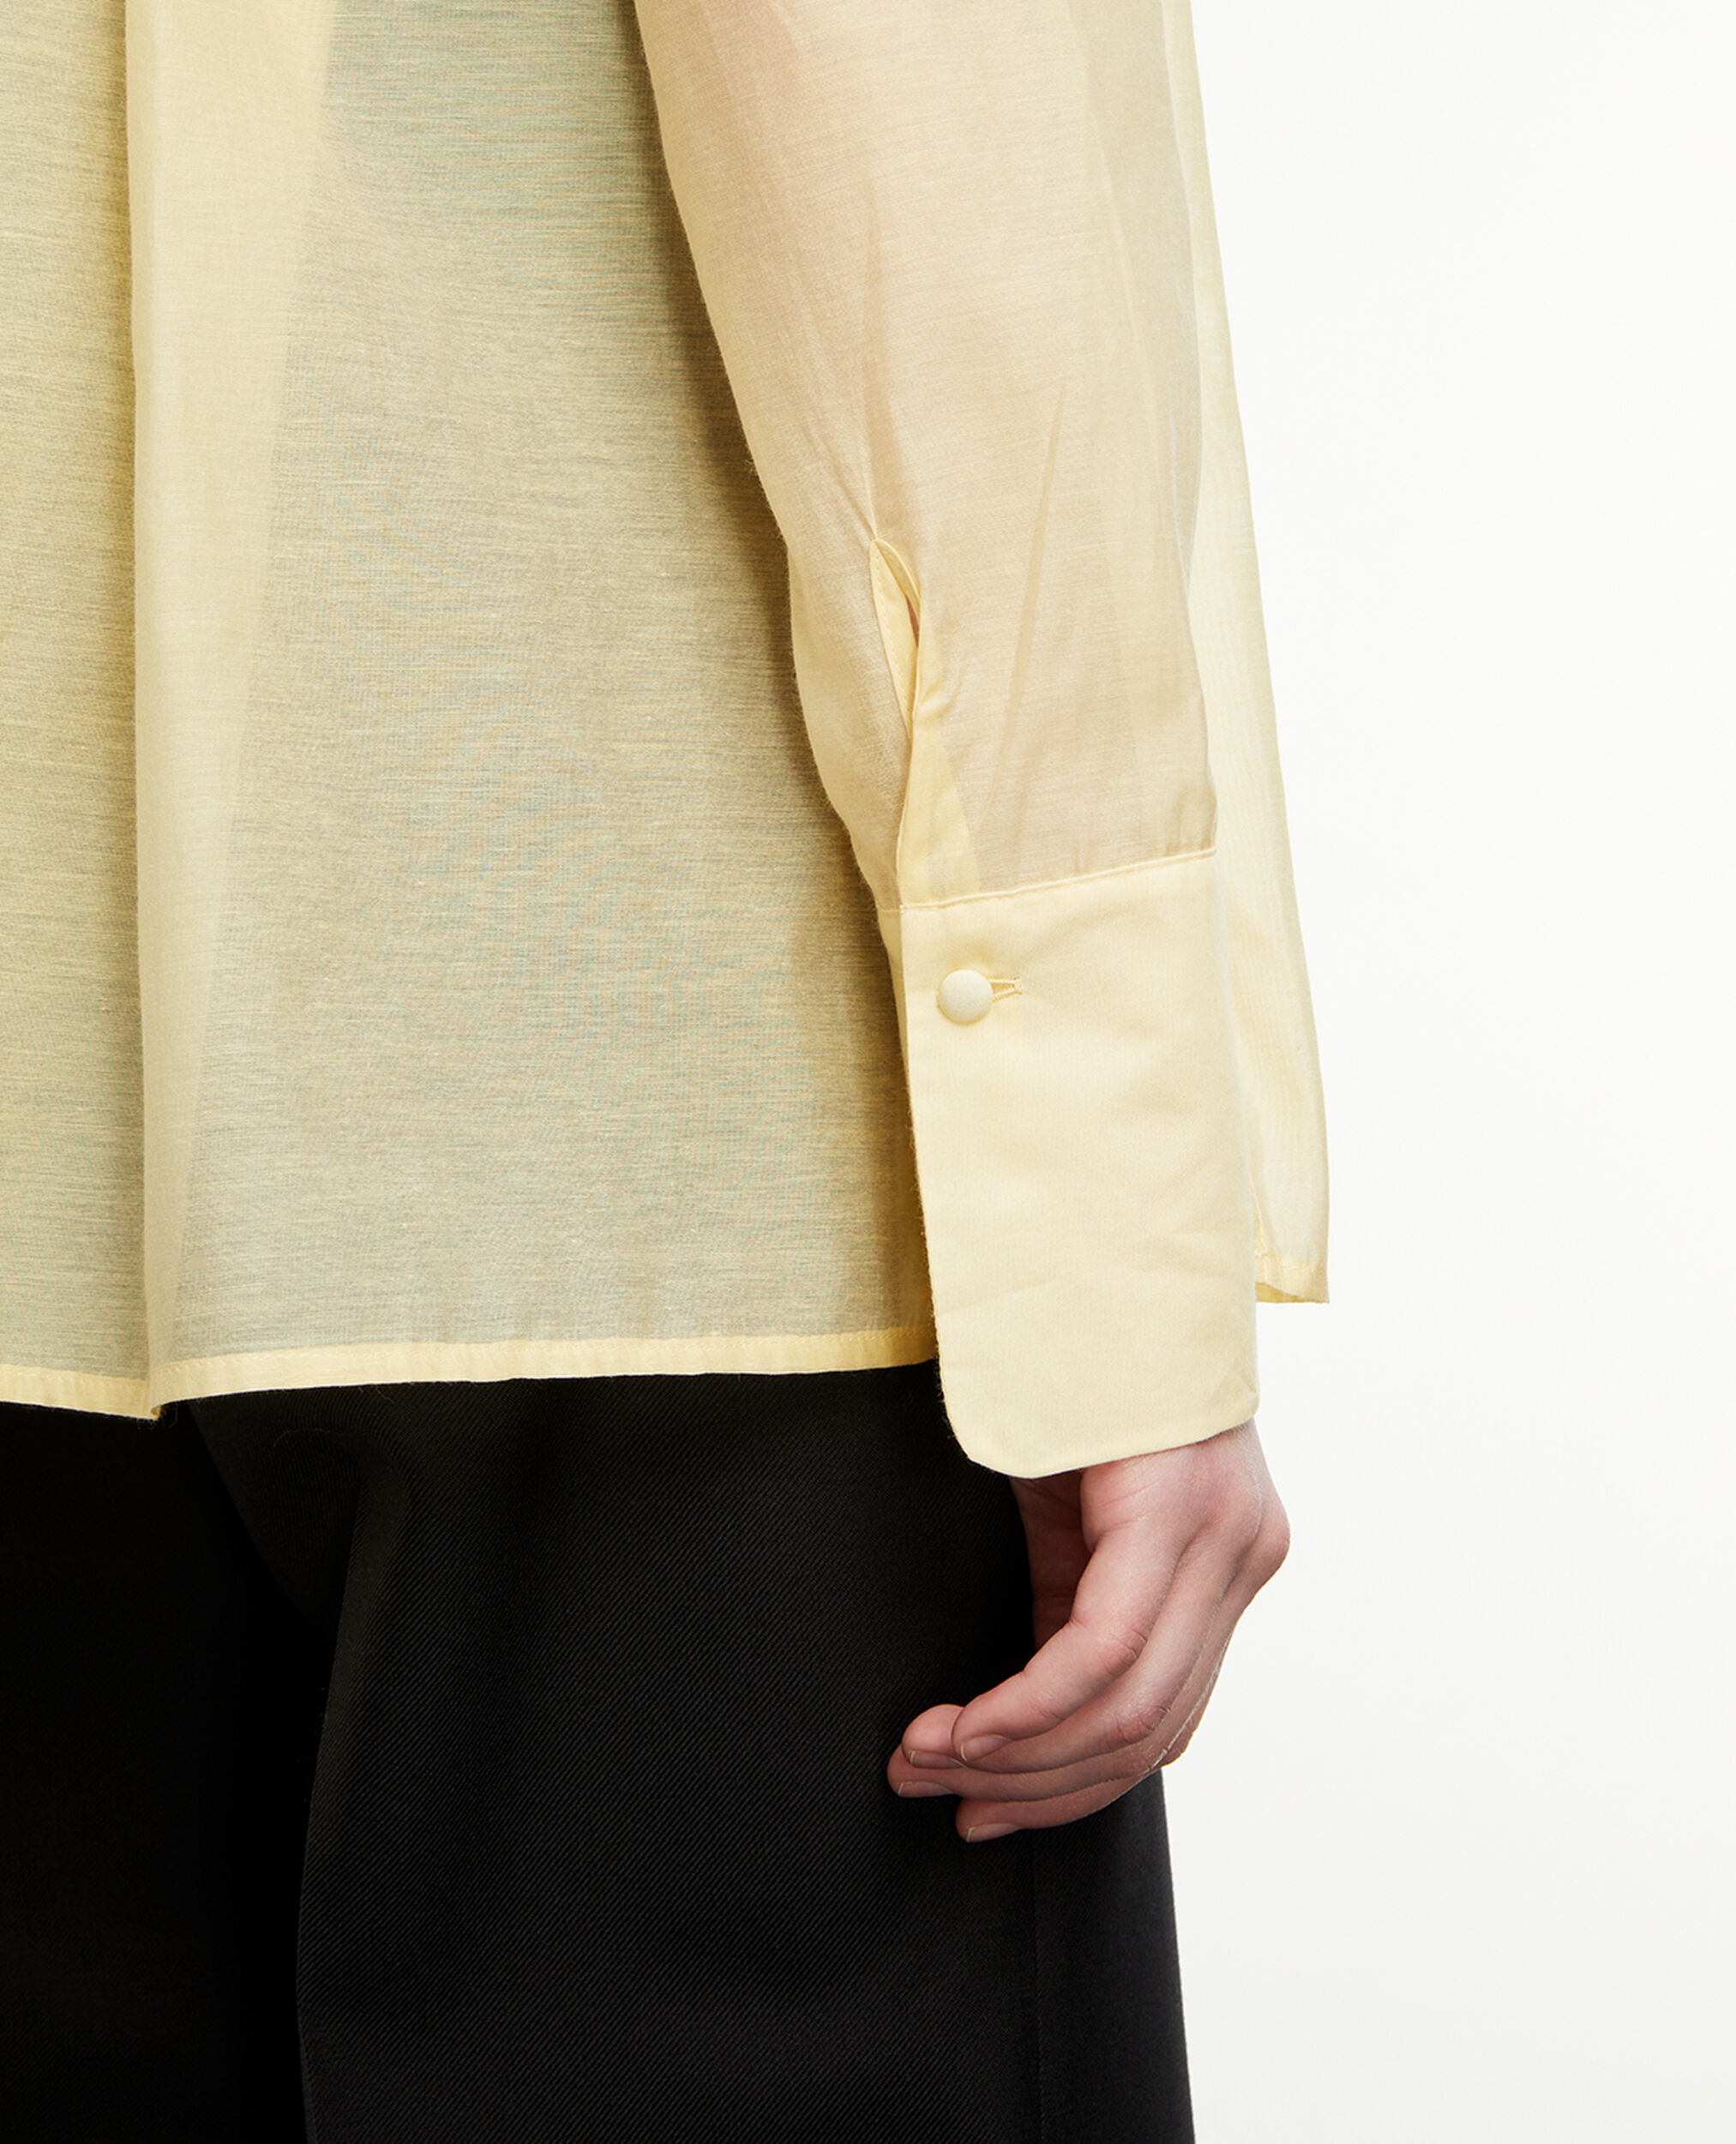 Simple light yellow shirt w/back pleat, LIGHT YELLOW, hi-res image number null